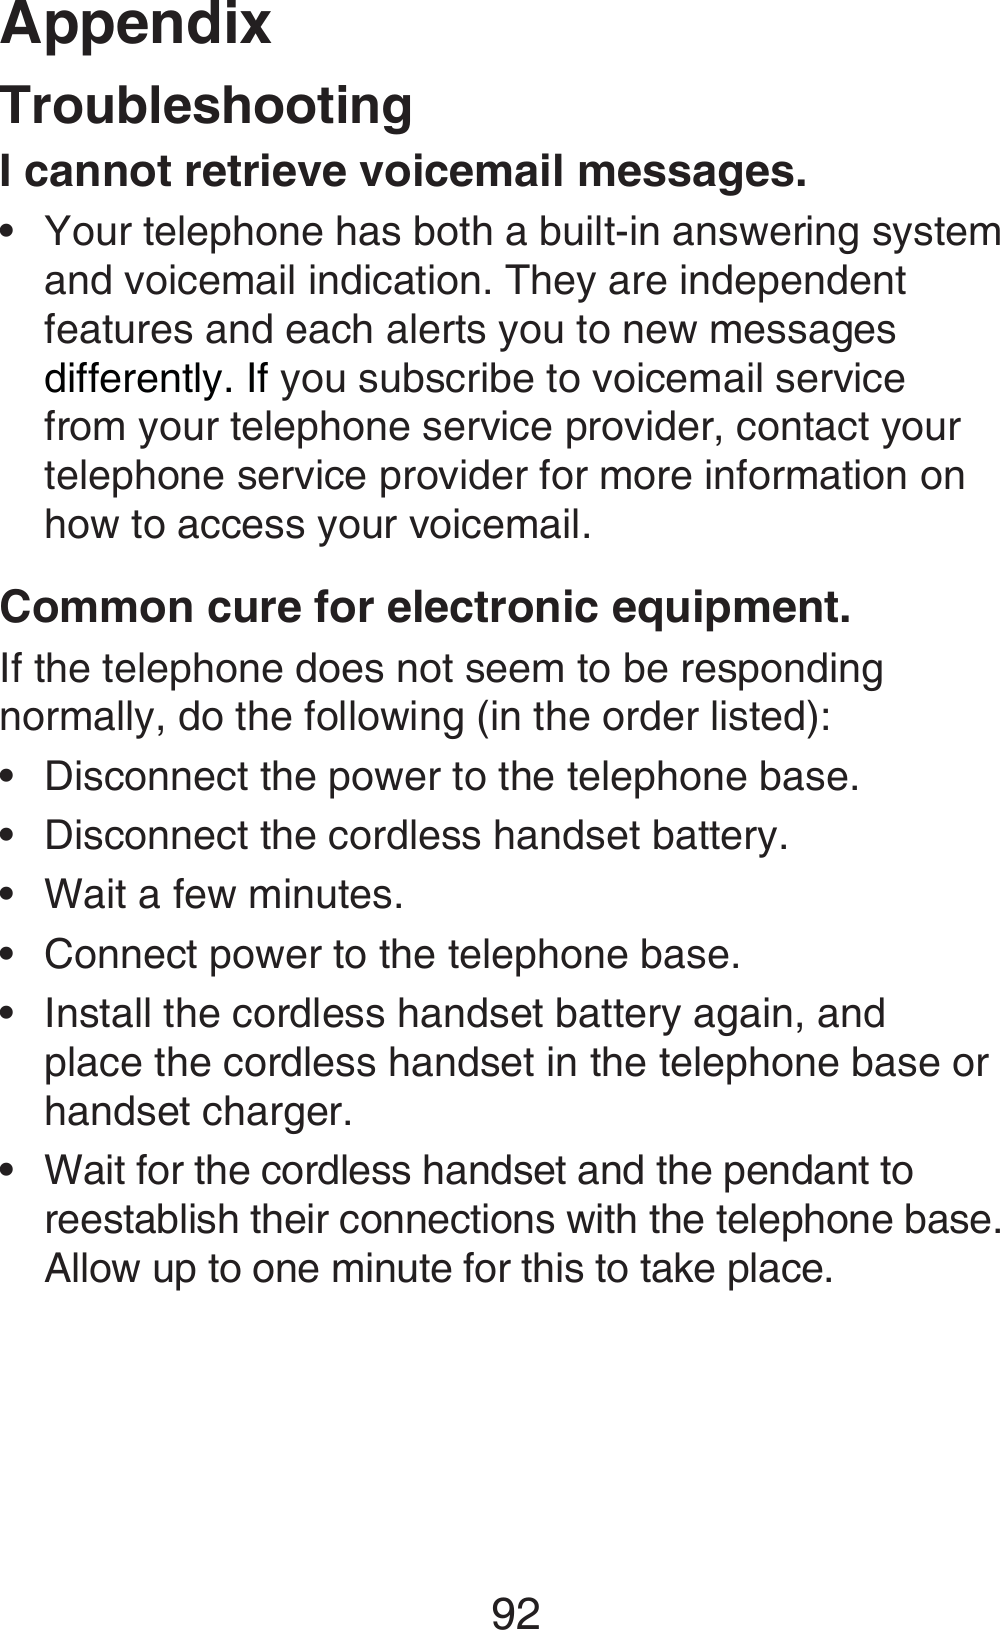 Appendix92TroubleshootingI cannot retrieve voicemail messages.Your telephone has both a built-in answering system and voicemail indication. They are independent features and each alerts you to new messages differently. If you subscribe to voicemail service from your telephone service provider, contact your telephone service provider for more information on how to access your voicemail.Common cure for electronic equipment.If the telephone does not seem to be responding normally, do the following (in the order listed):Disconnect the power to the telephone base.Disconnect the cordless handset battery.Wait a few minutes.Connect power to the telephone base.Install the cordless handset battery again, and place the cordless handset in the telephone base or handset charger.Wait for the cordless handset and the pendant to reestablish their connections with the telephone base. Allow up to one minute for this to take place.•••••••